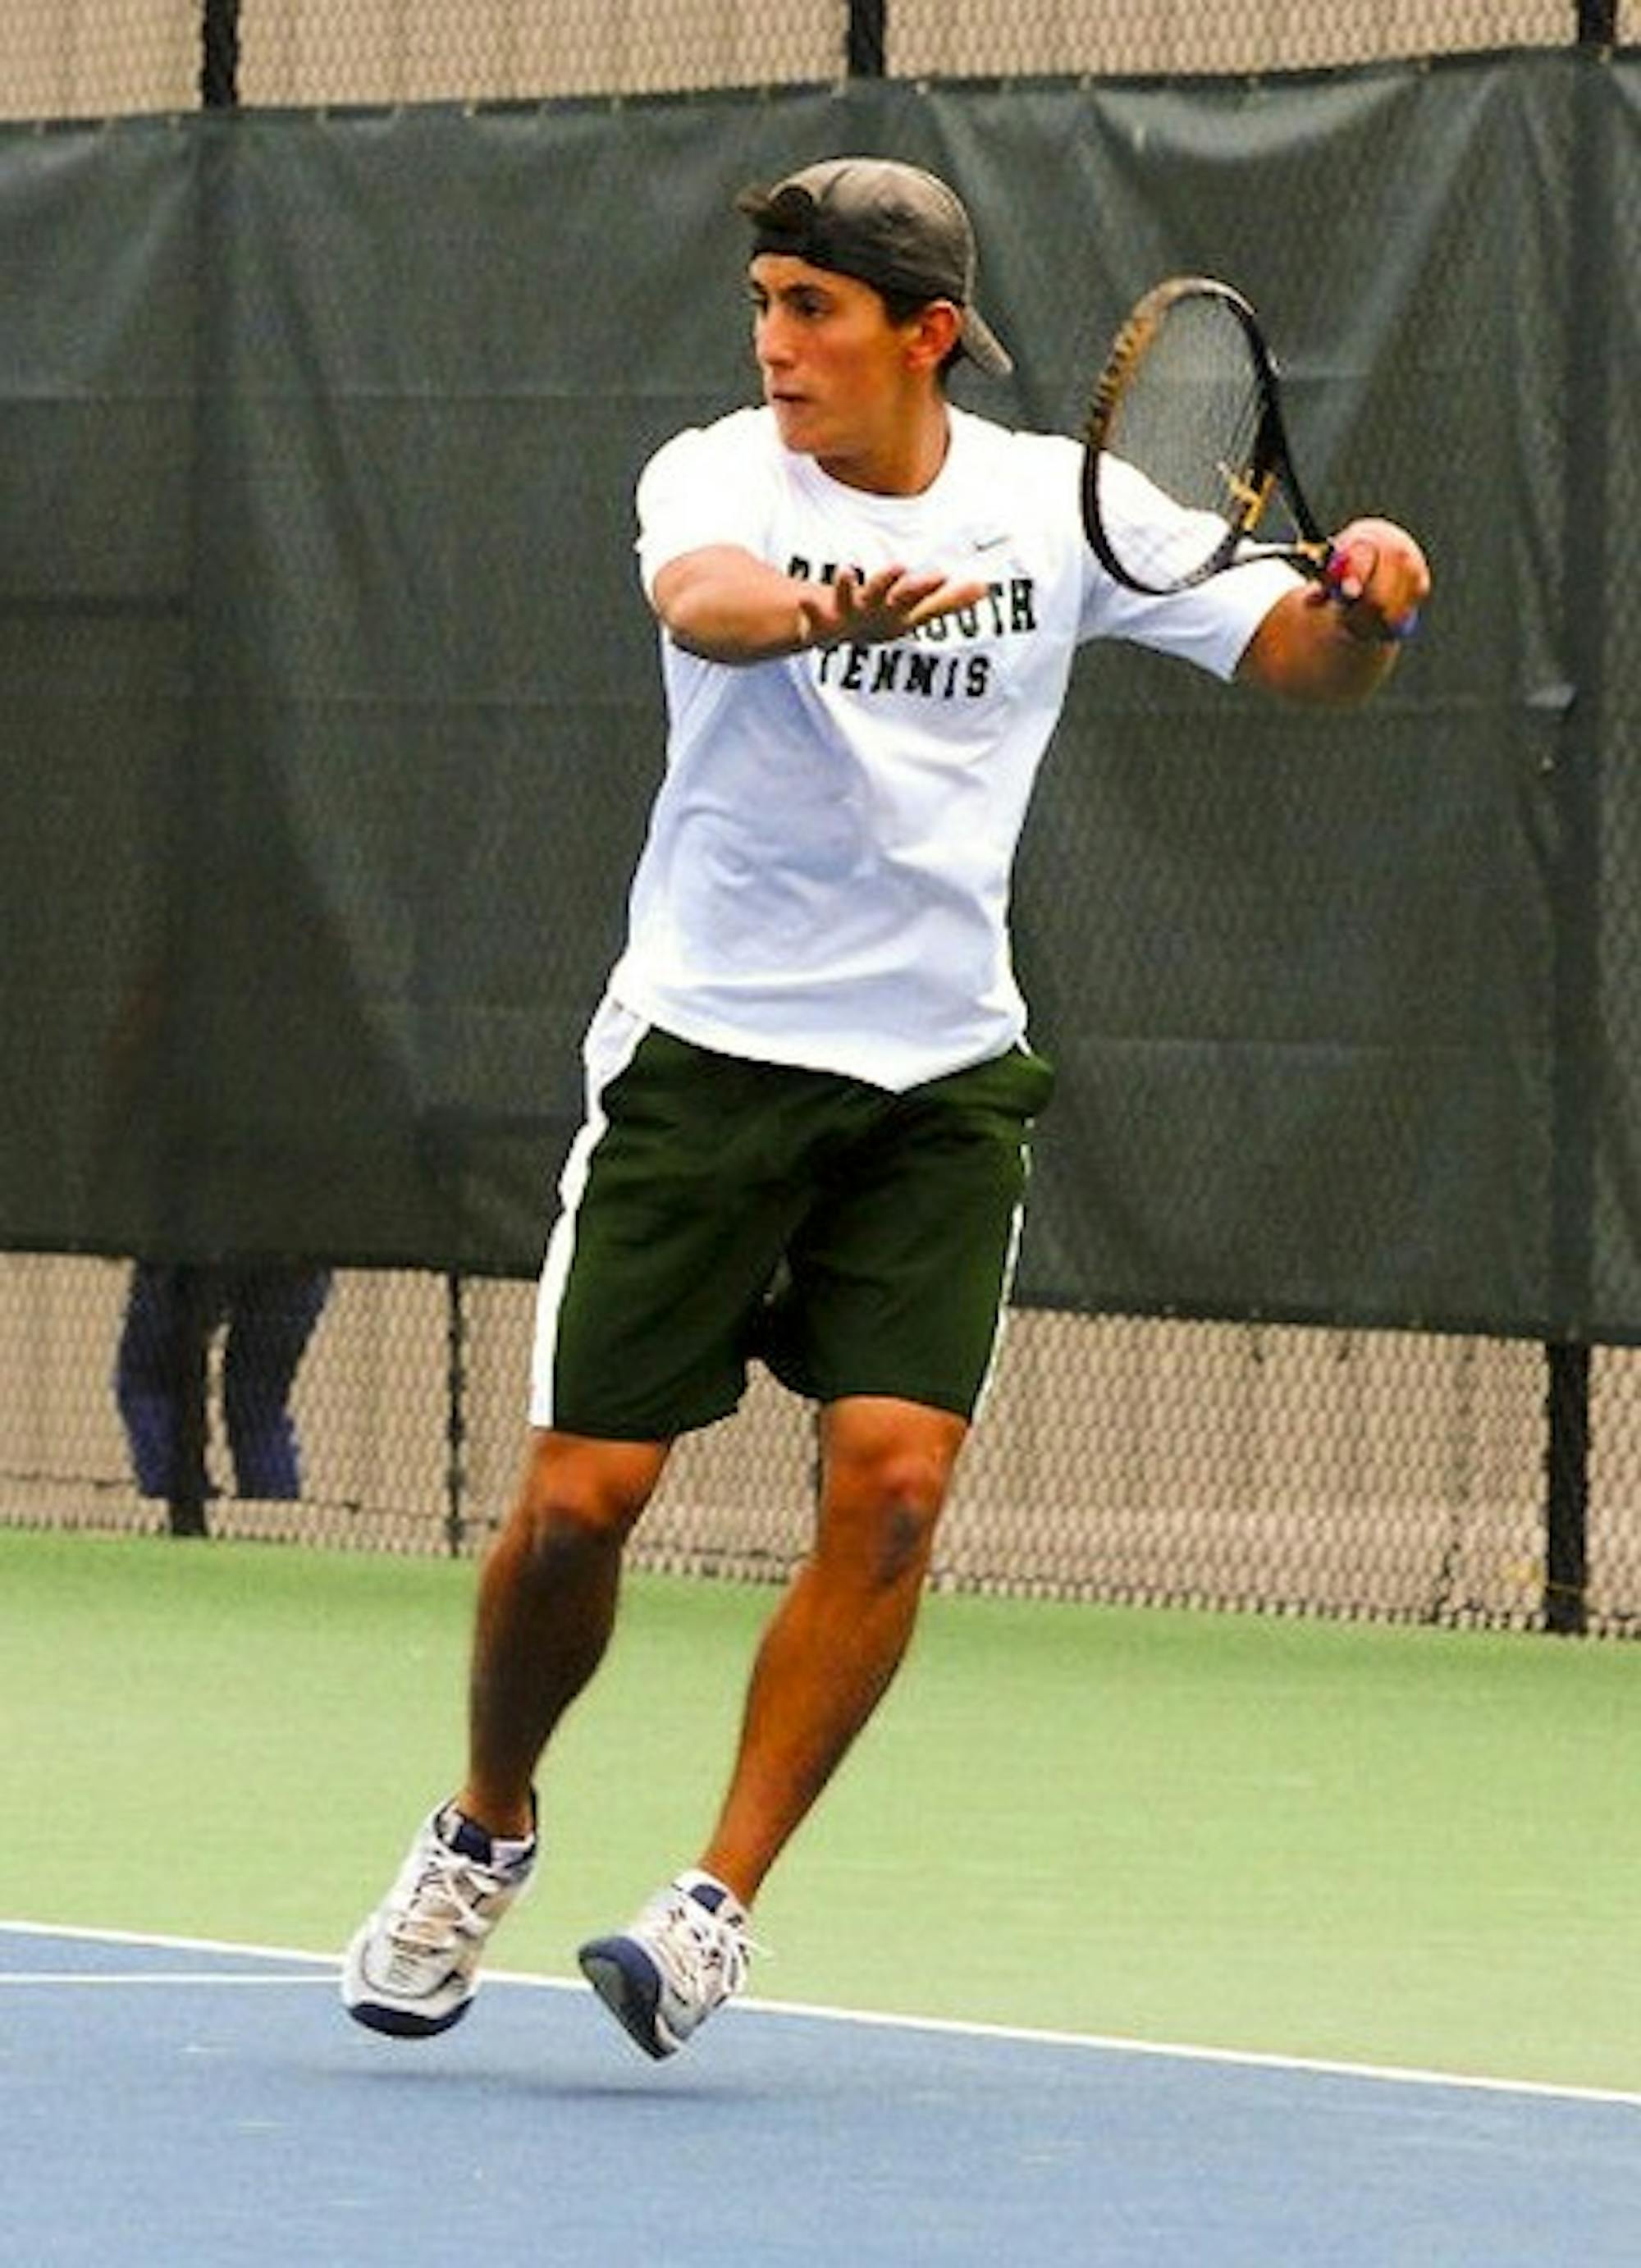 Alex de Chatellus '13, along with partner Michael Jacobs '13, reached the finals in the doubles division of the 30th annual New Hampshire Men's Open.